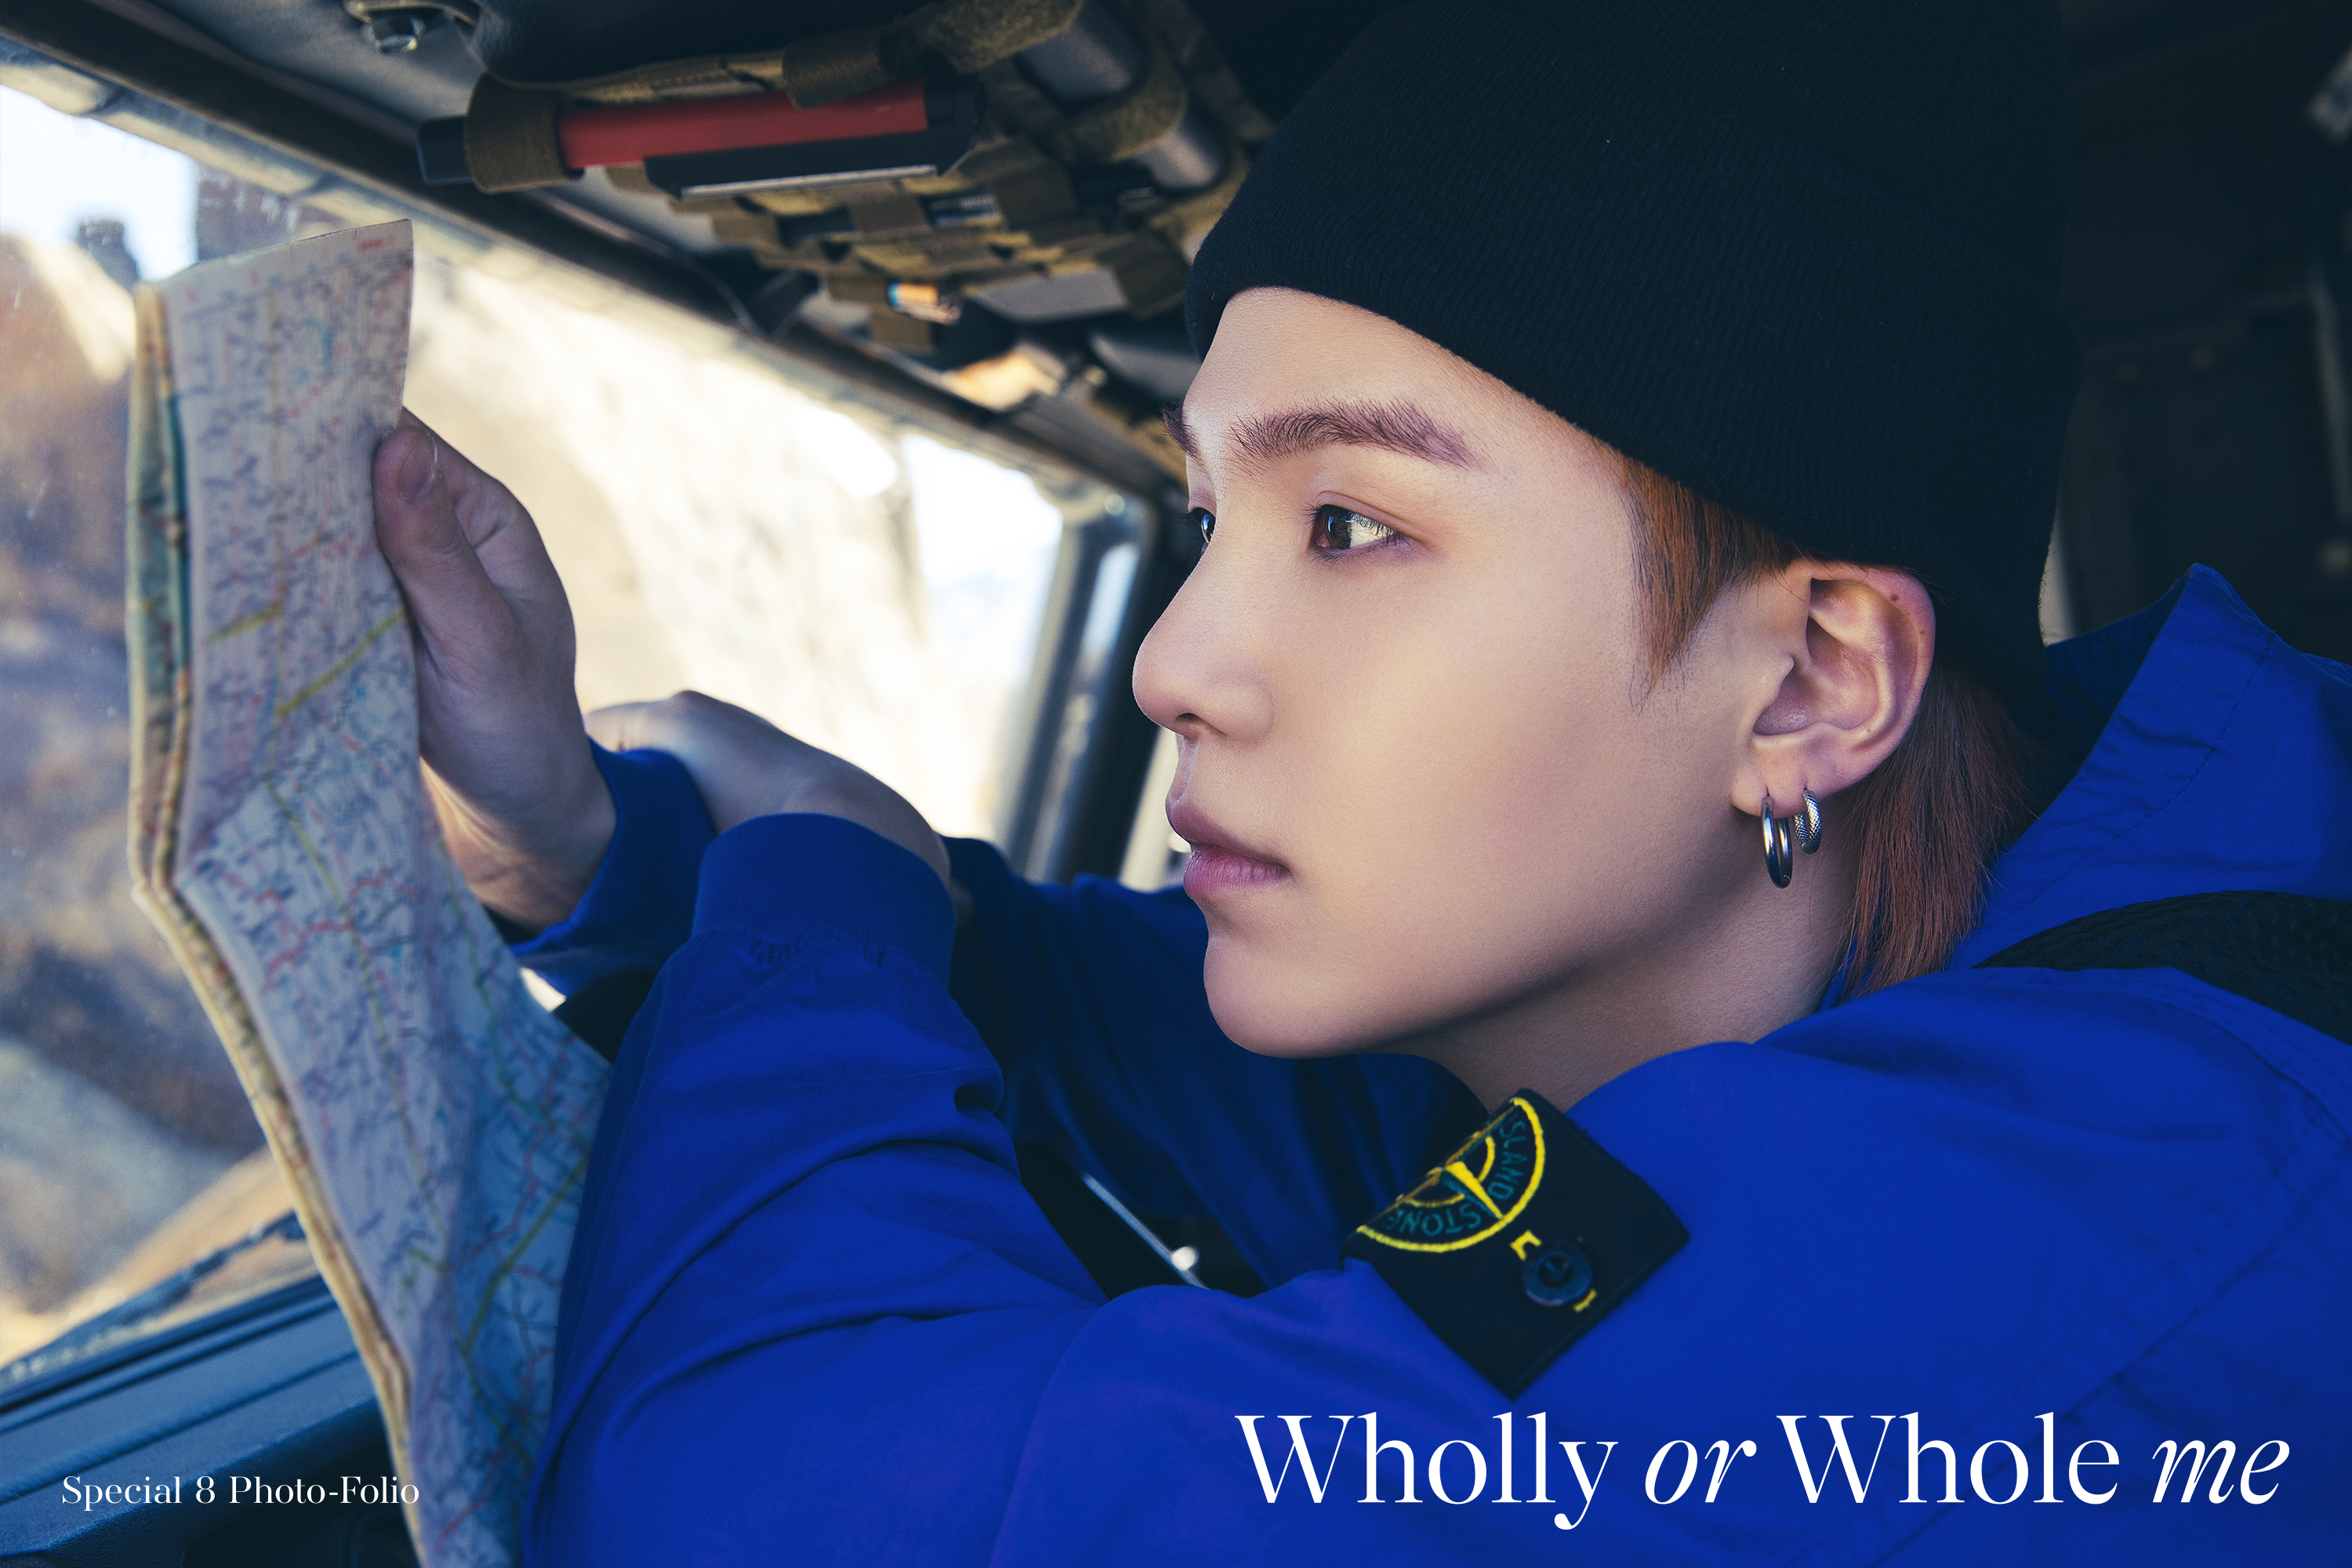 Me, Myself, and SUGA 'Wholly or Whole me' Preview Image 1